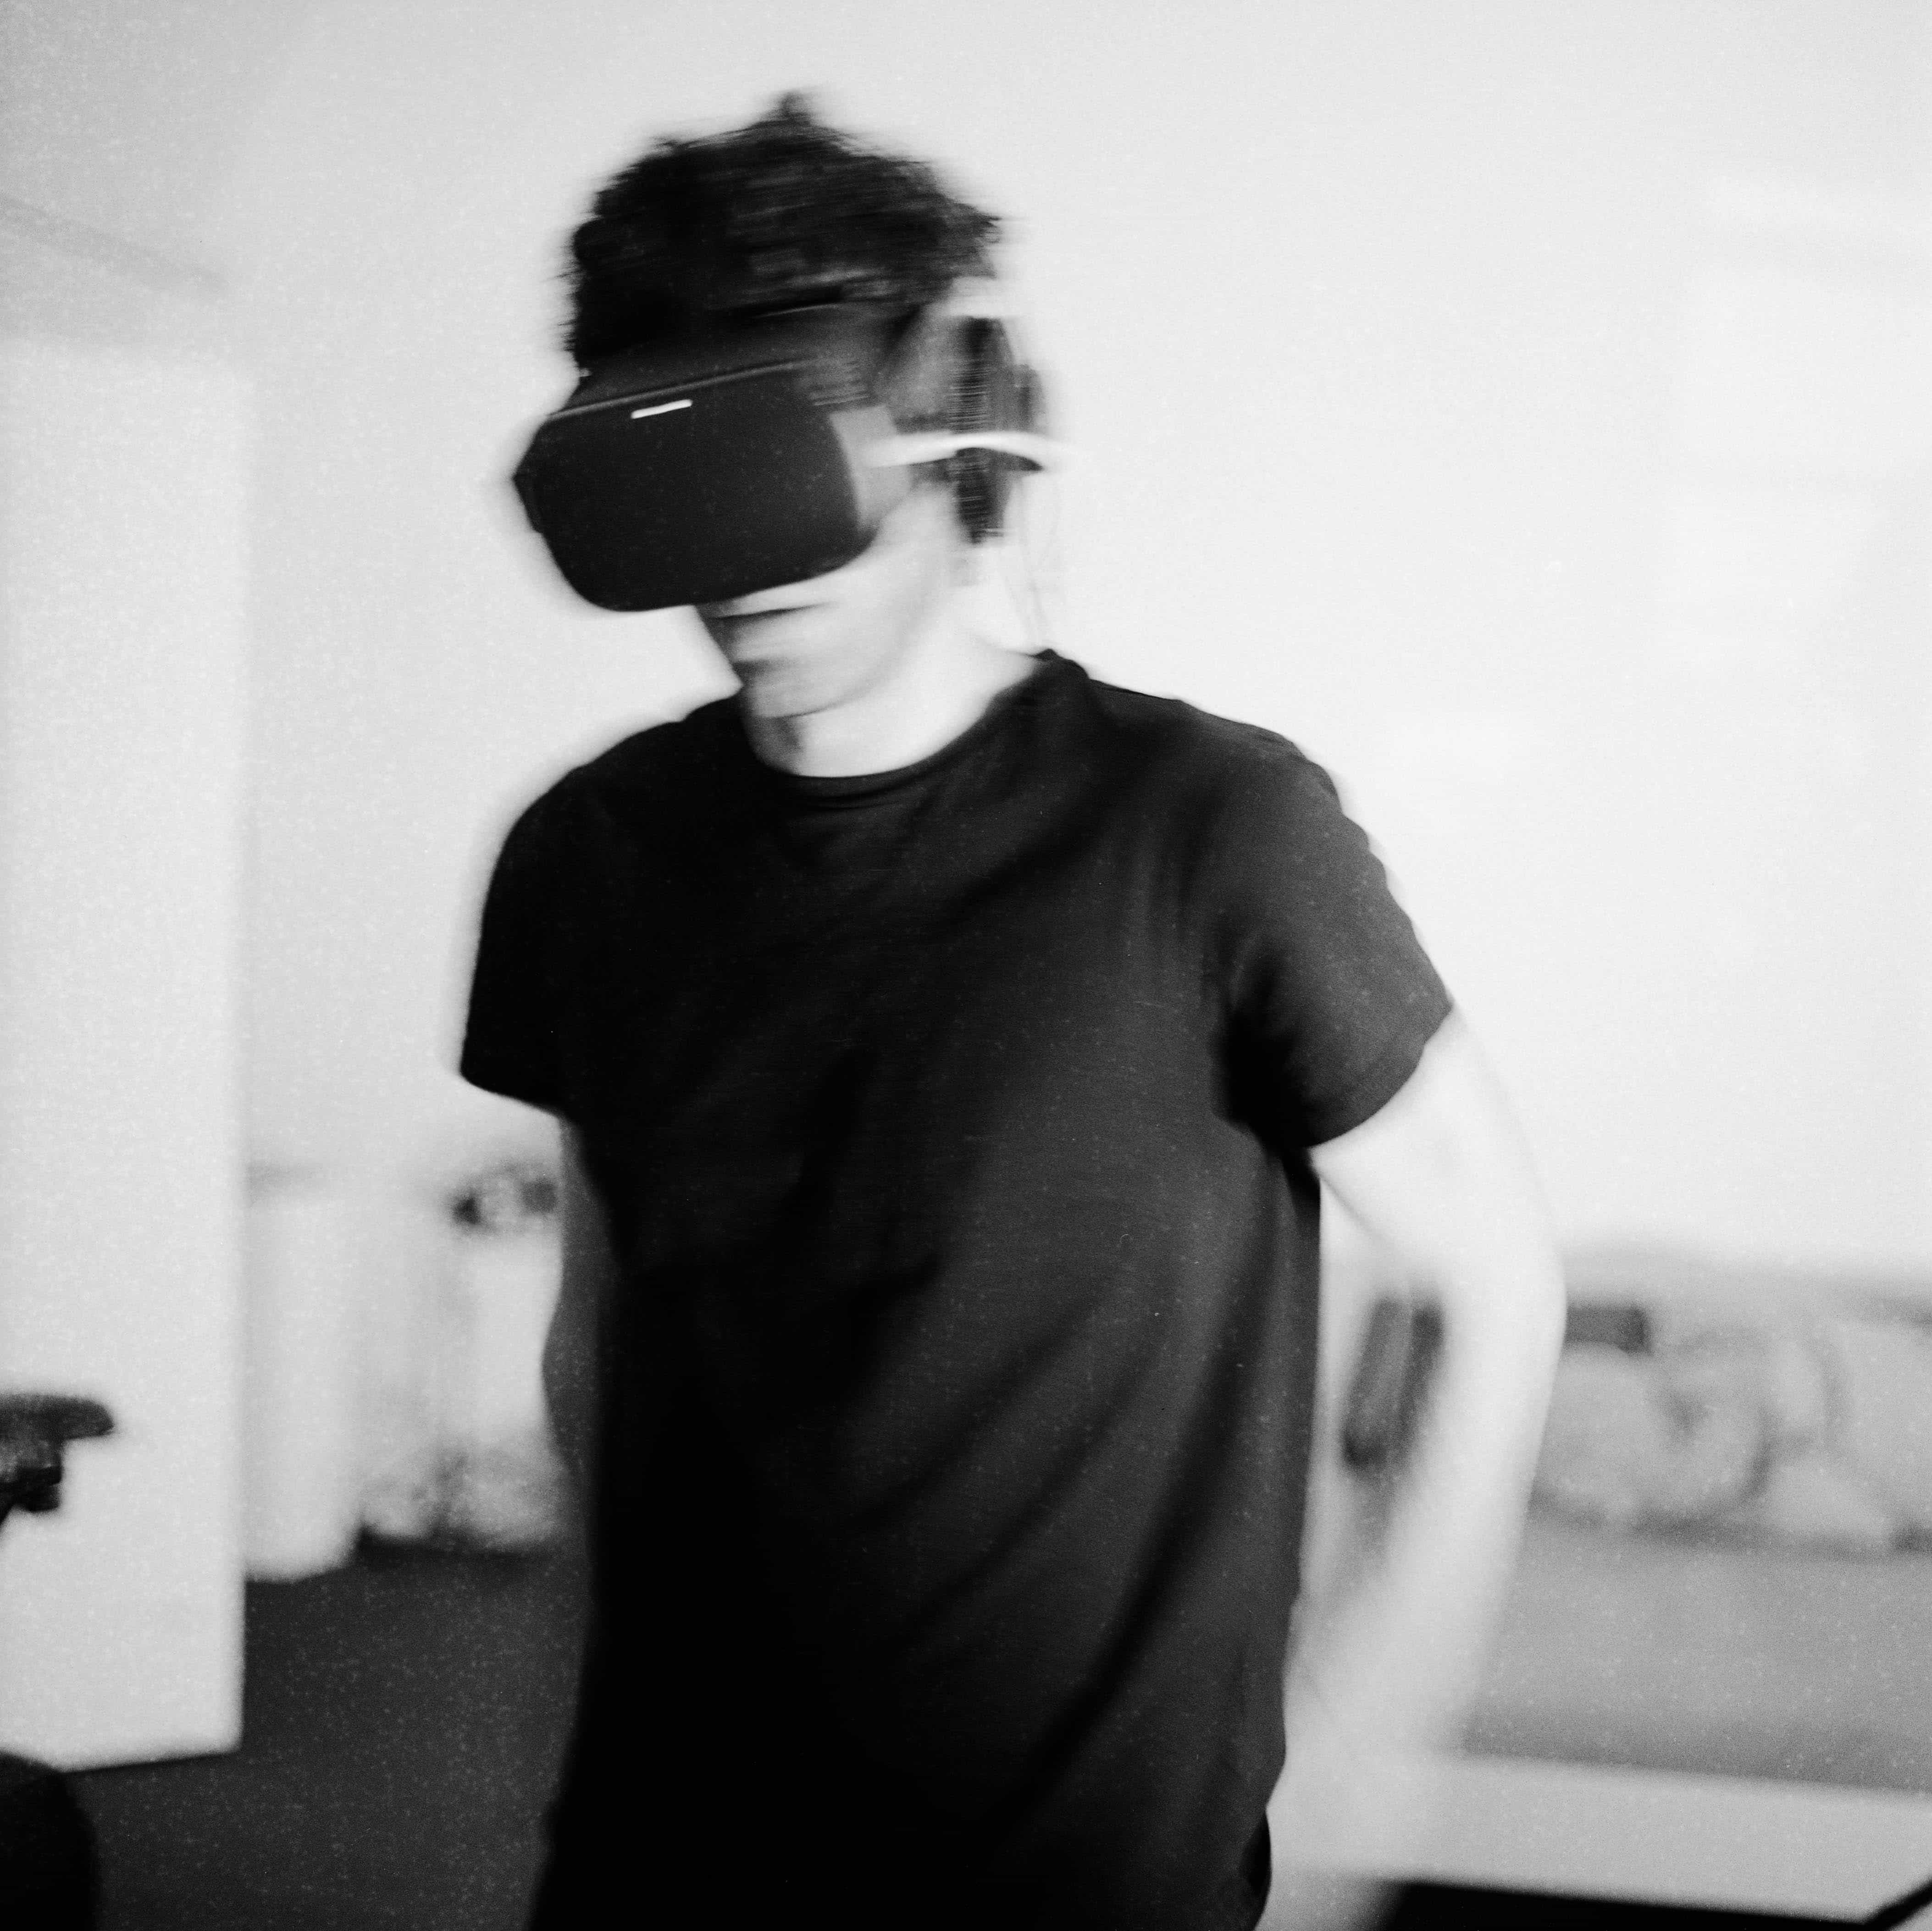 The artist with the VR headset on, walking around.